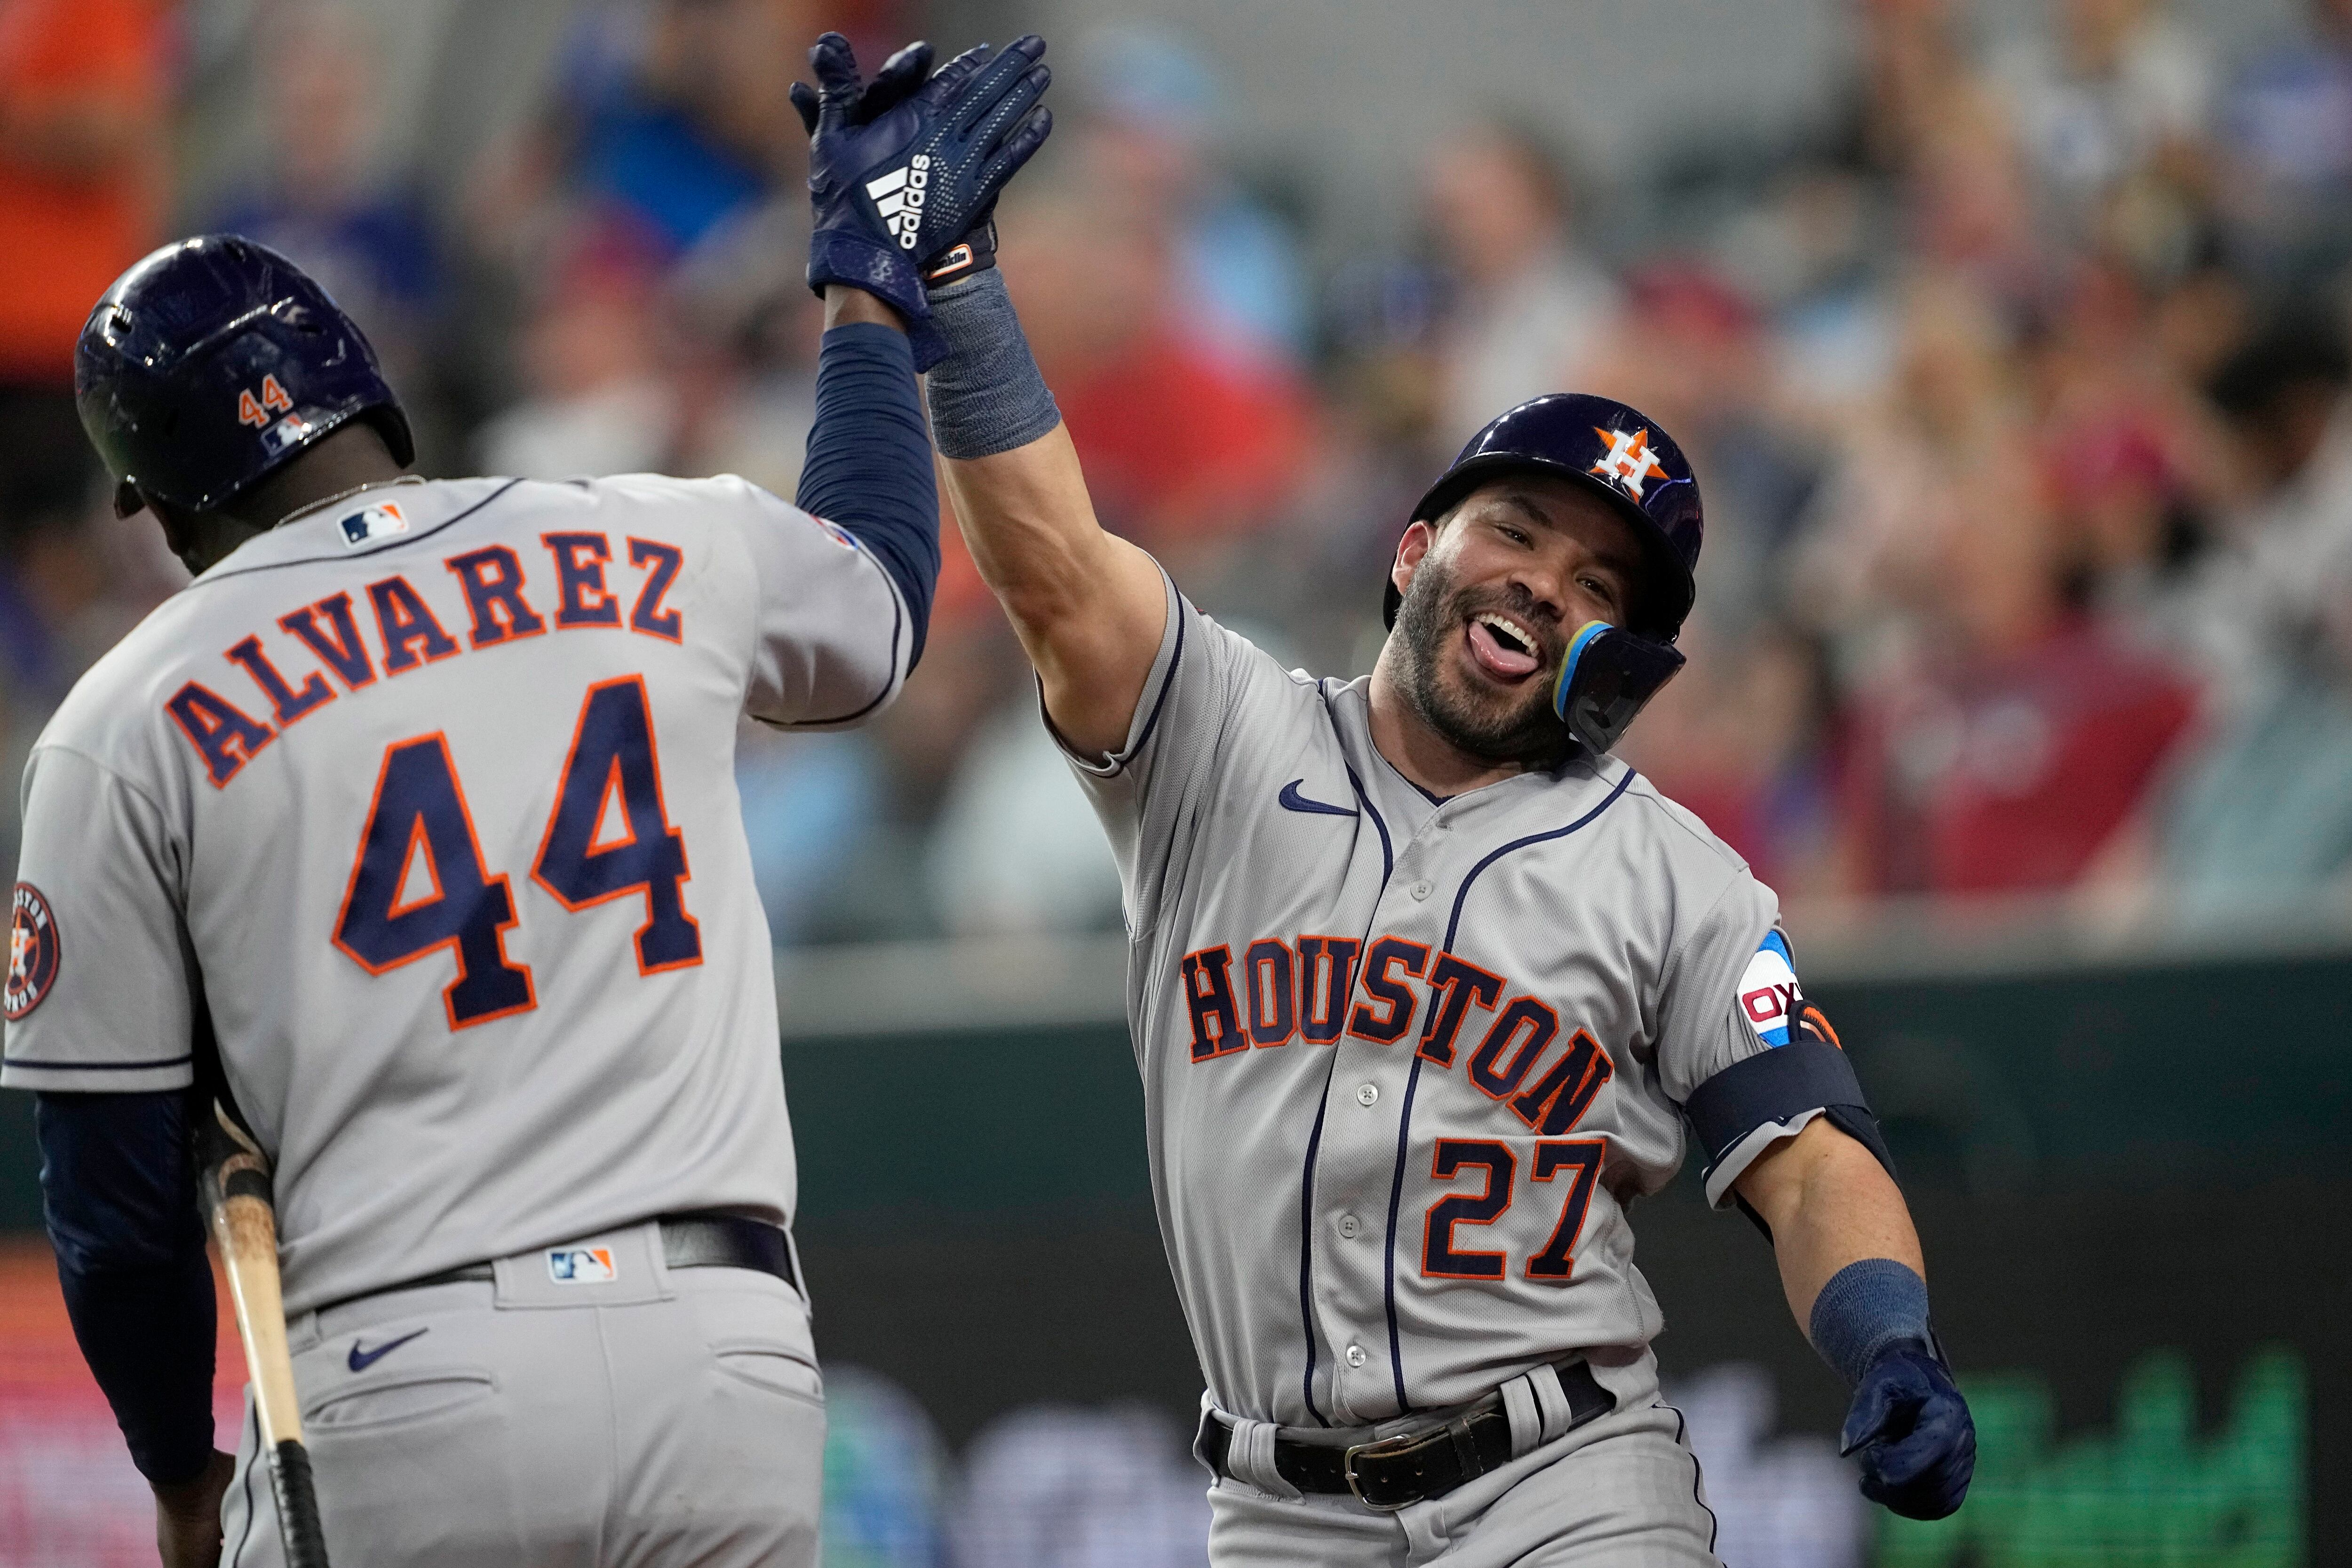 Novelty no more: Astros' Jose Altuve in the conversation as one of